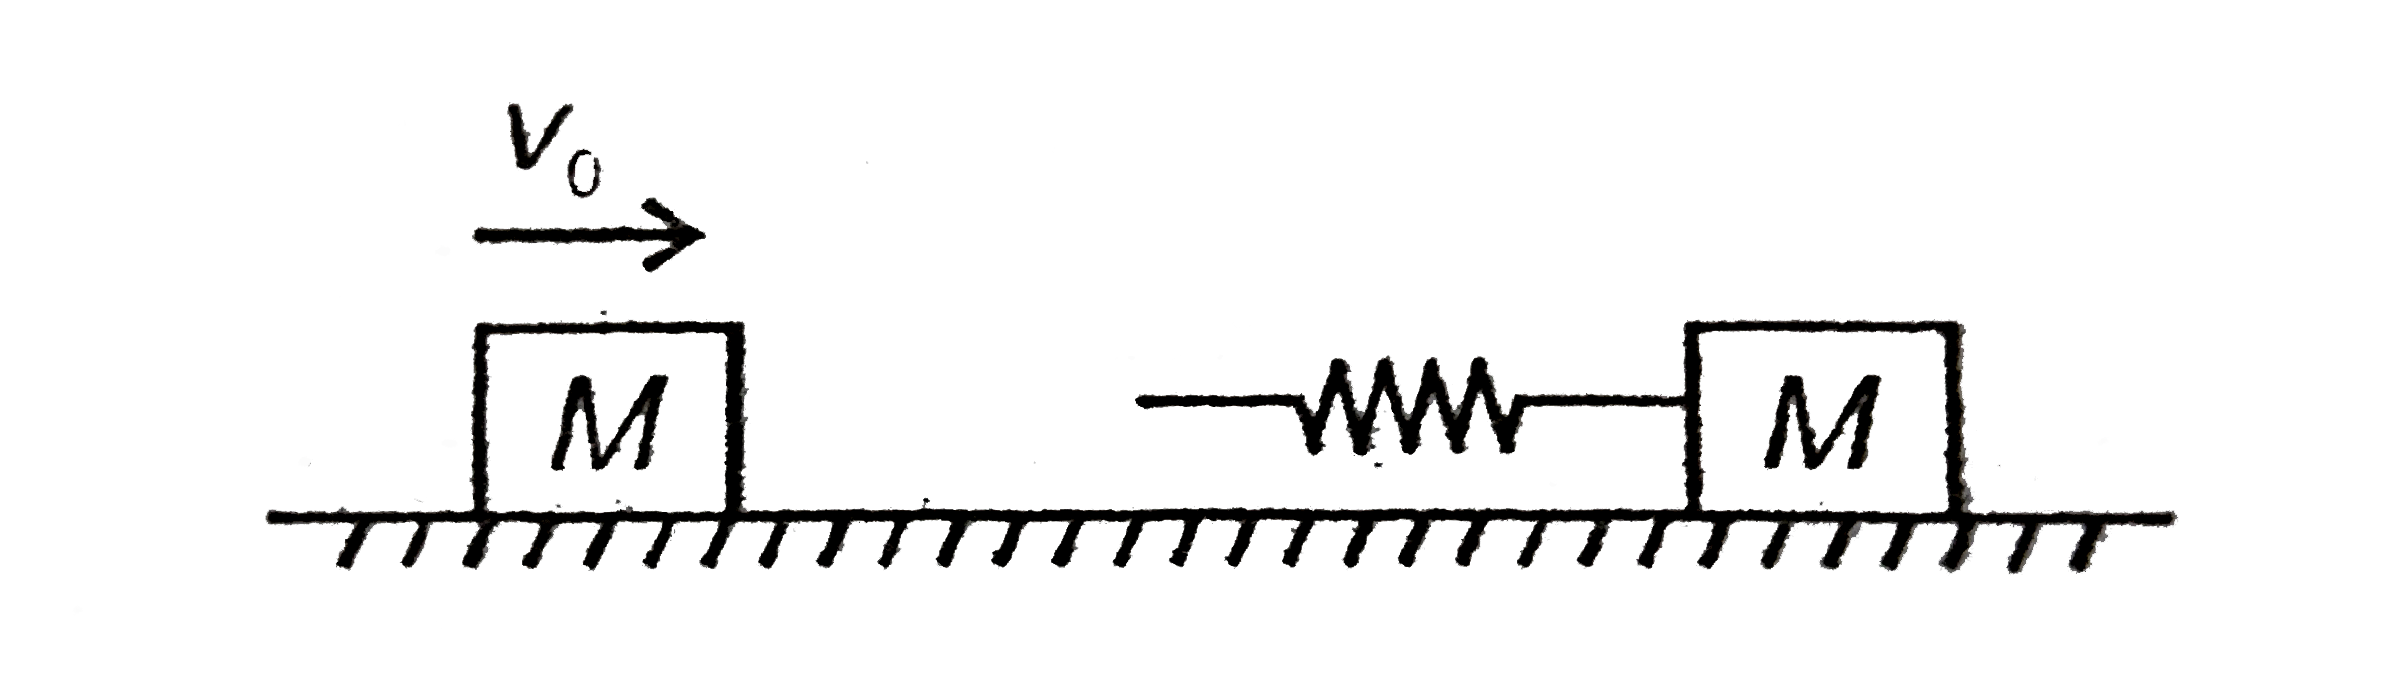 A body of mass M is moving on a  smooth surface with speed v(0). Another body of same mass M attached to a spring is kept on the same surface as shown. The moving mas makes an impact with the spring of spring constant k and starts compressing it. What is the maximum compression in the spring ?